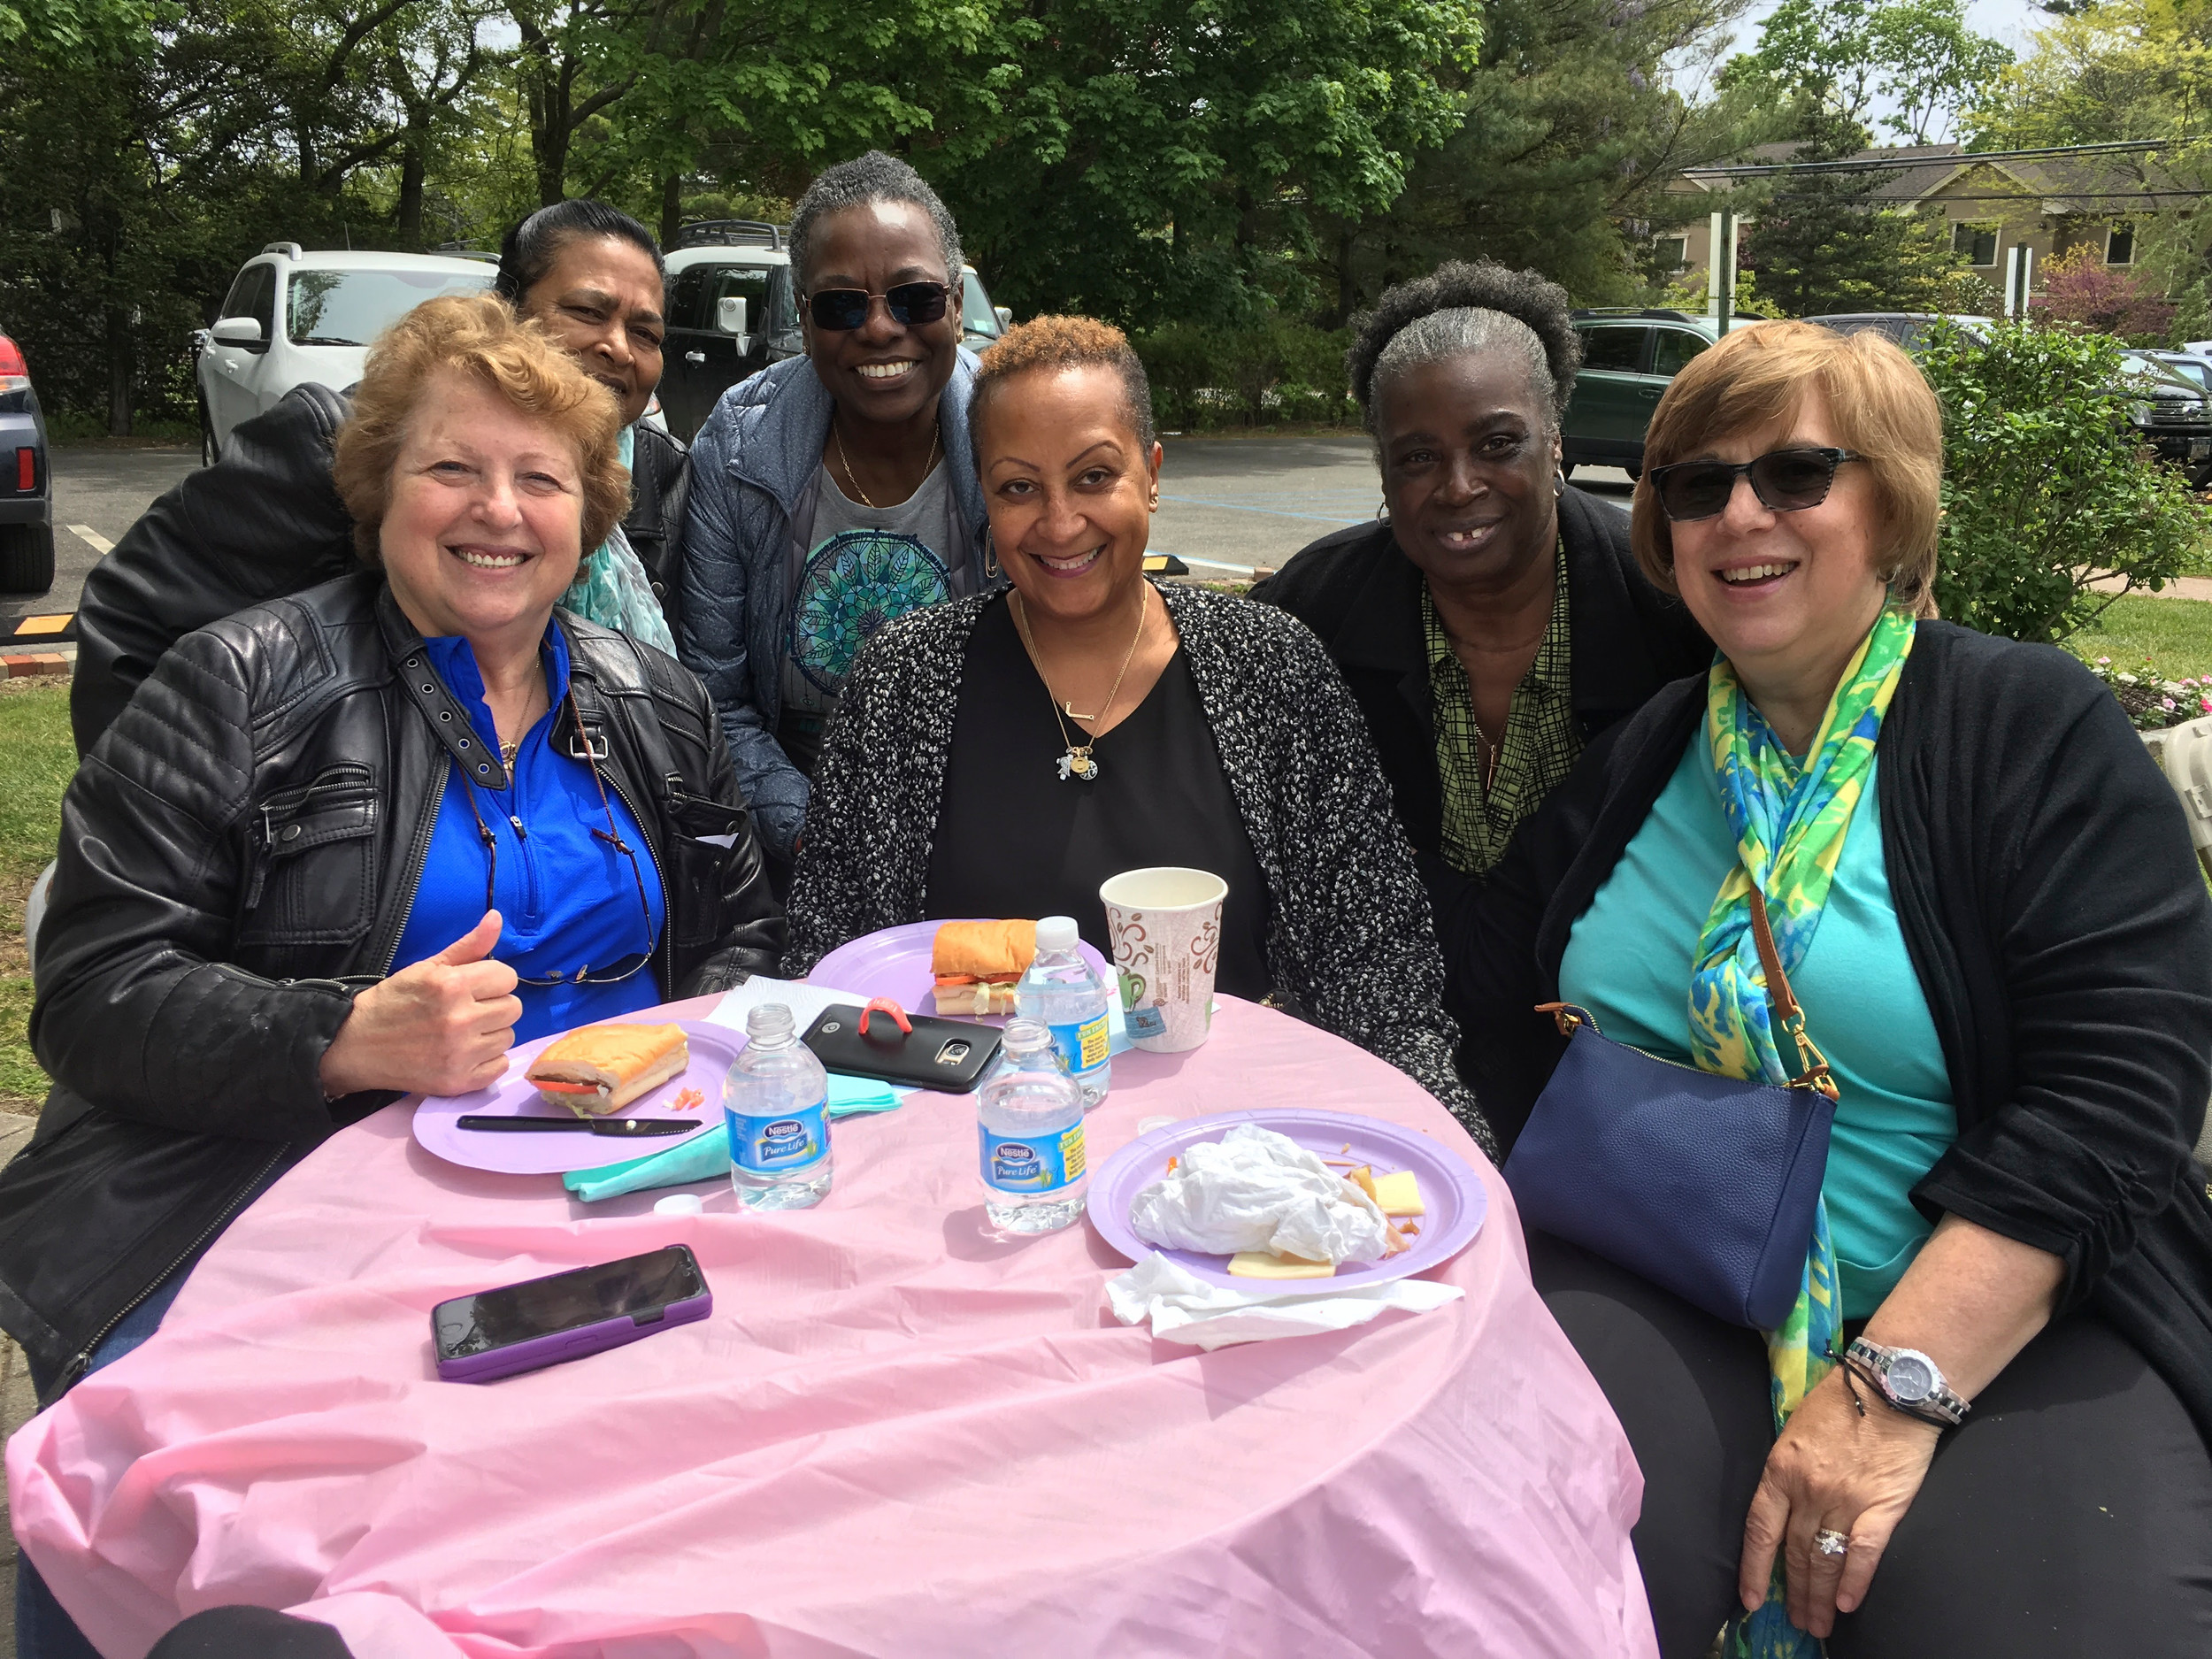 Marlene Natale, far left, a West Hempstead resident, with Nina Tribble, Nancy Coyle, Juliet King, Olivia Fox and Shirley Washington. All gather at the Hewlett House on a regular basis.